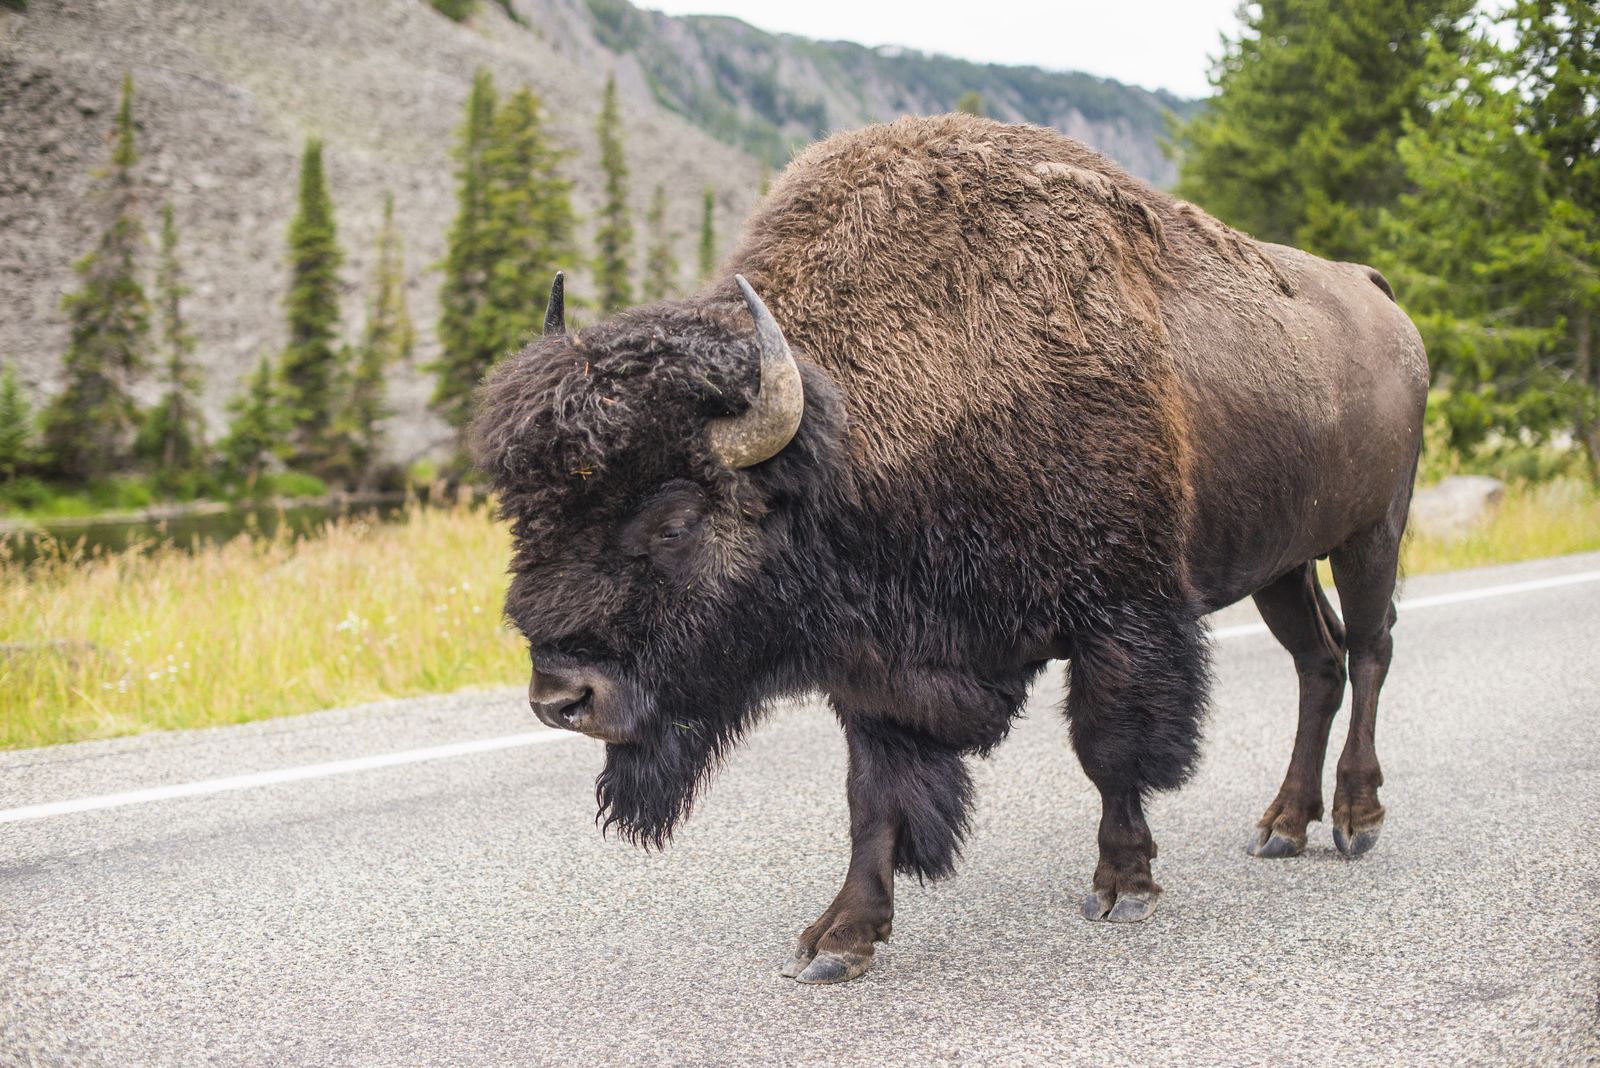 Woman Gored by a Bison in Yellowstone National Park | Smart News